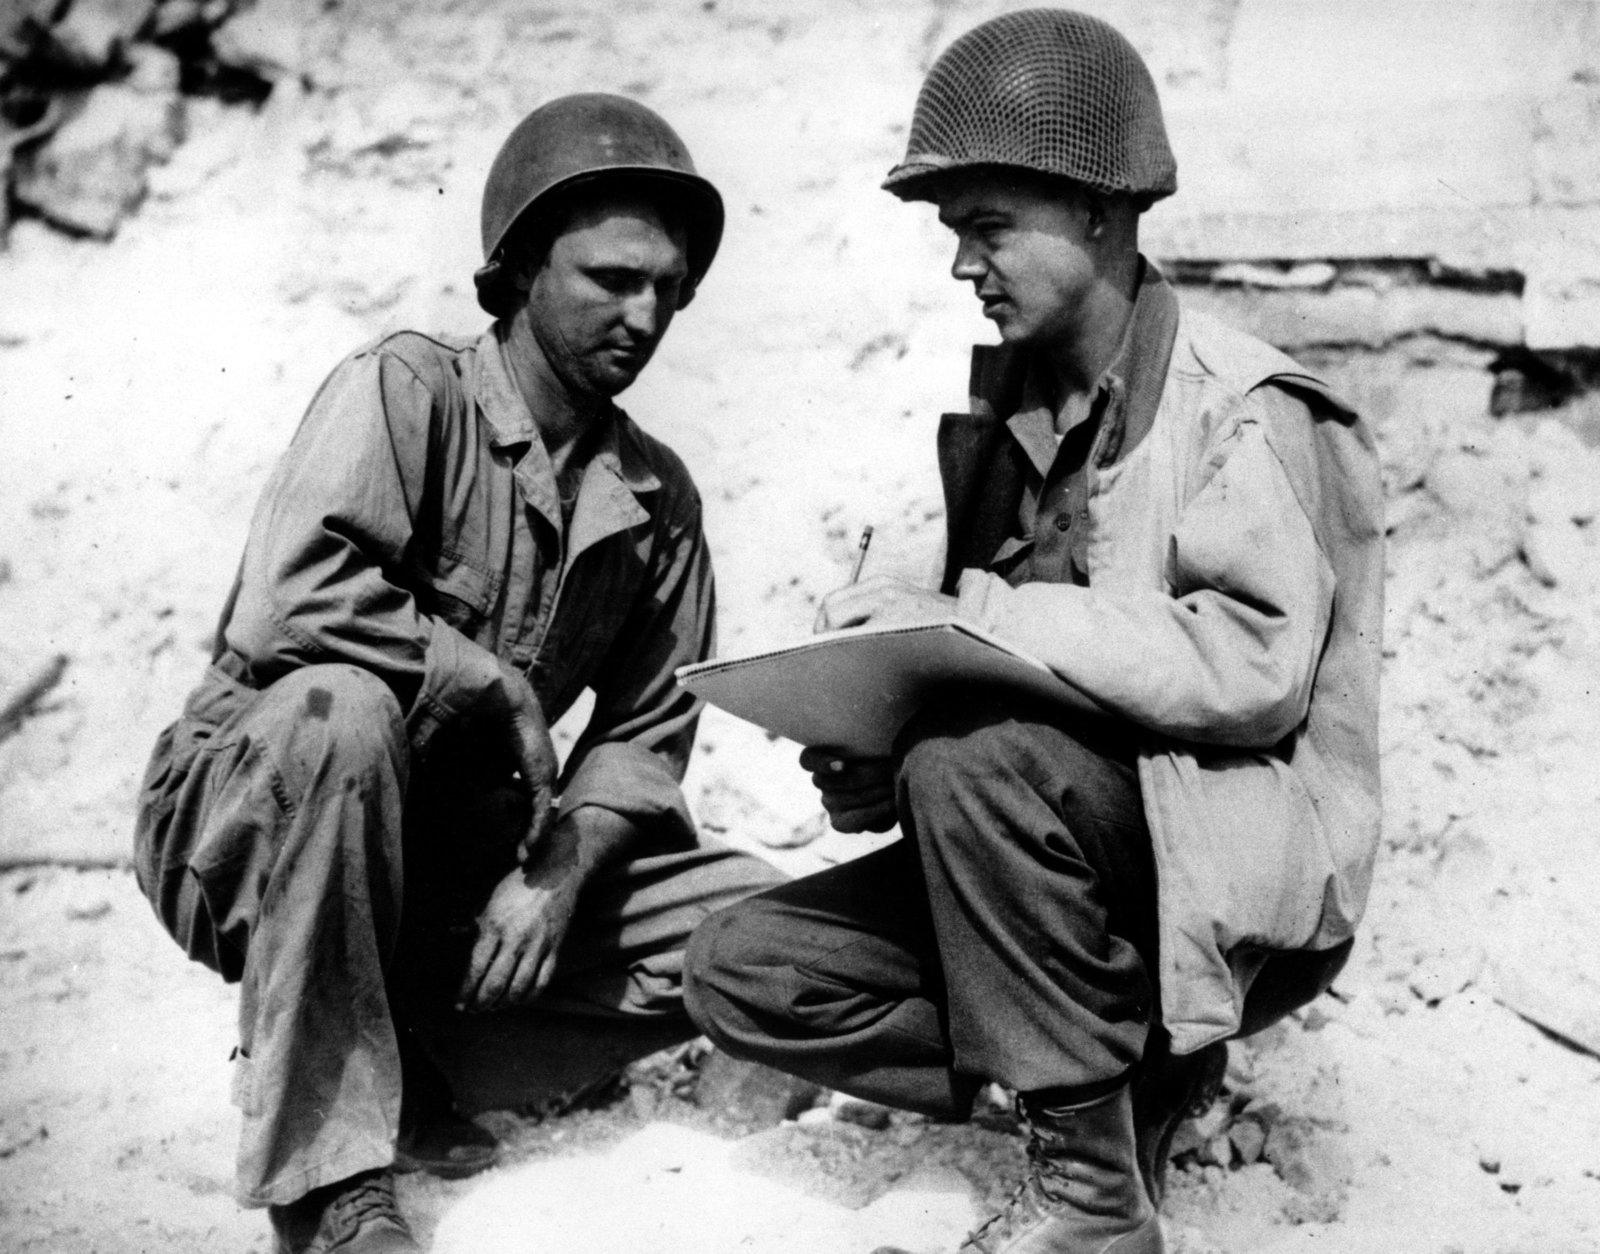 Pvt. Robert L. Bowman, left, of Hogansville, Ga., poses for Stars and Stripes artist Sgt. Bill Mauldin, on the Anzio beachhead in Italy during World War II in May, 1944.  The completed picture will be known as "G.I. Joe."  (AP Photo)